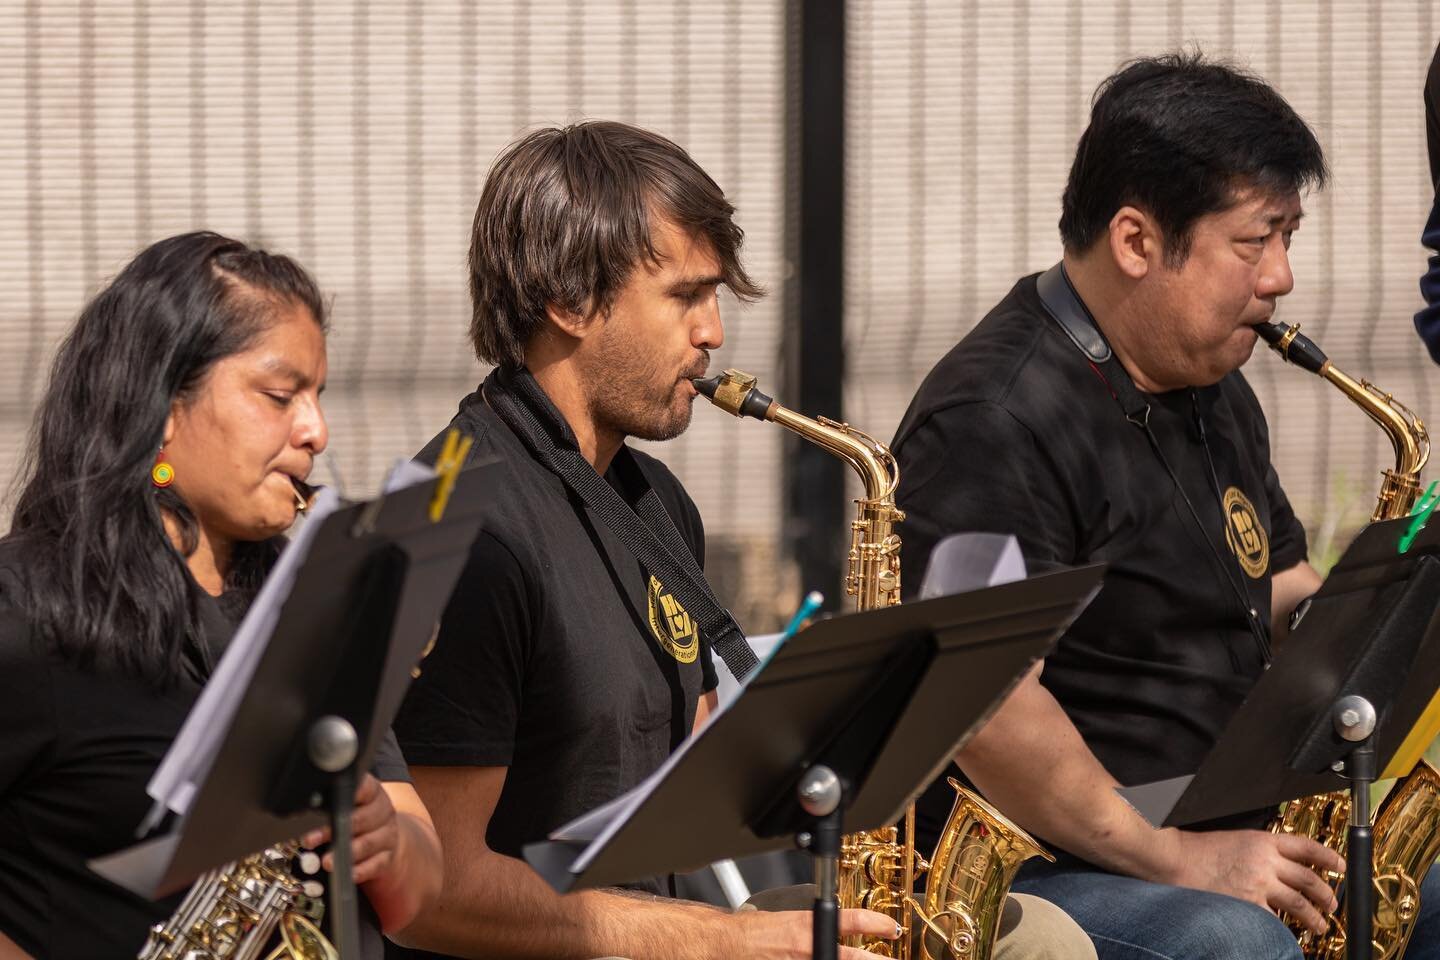 #flashbackfriday! it&rsquo;s been a little over a year since the orchestra&rsquo;s performance at the Golden Age Park celebration, organized by @uncommonucla @uclaluskin

🎭🎶 check out our story to rewatch the IG live featuring the ensemble and a bi